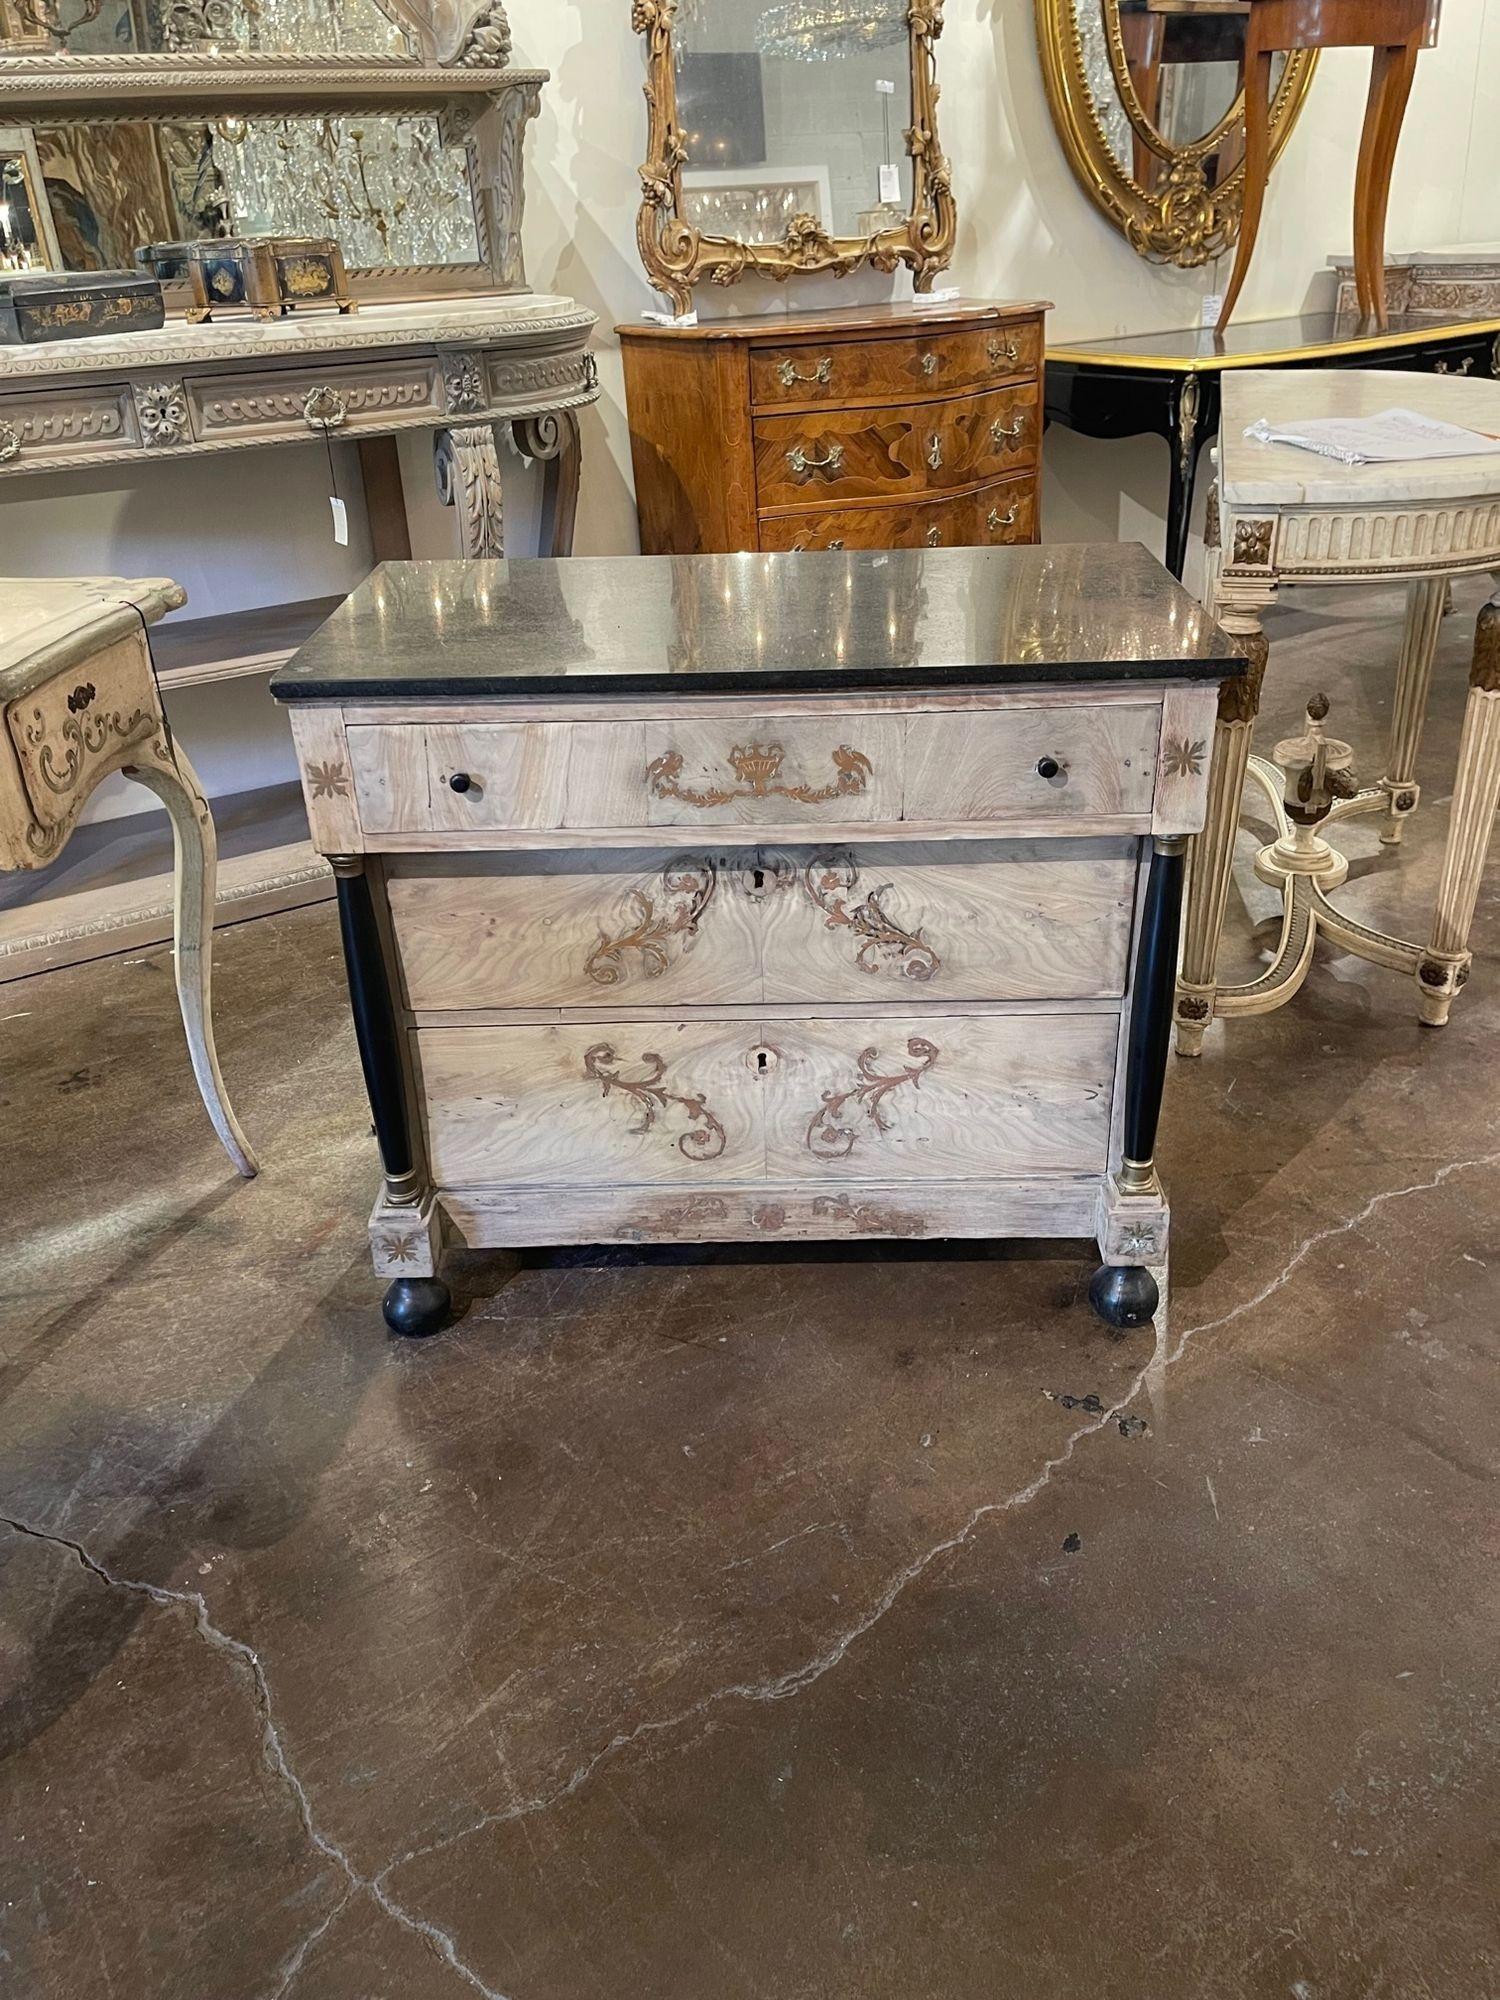 Gorgeous 19th century English mahogany bleached chest with decorative brass inlay. This piece also has a marble top and 3 drawers for storage. Makes an elegant statement!